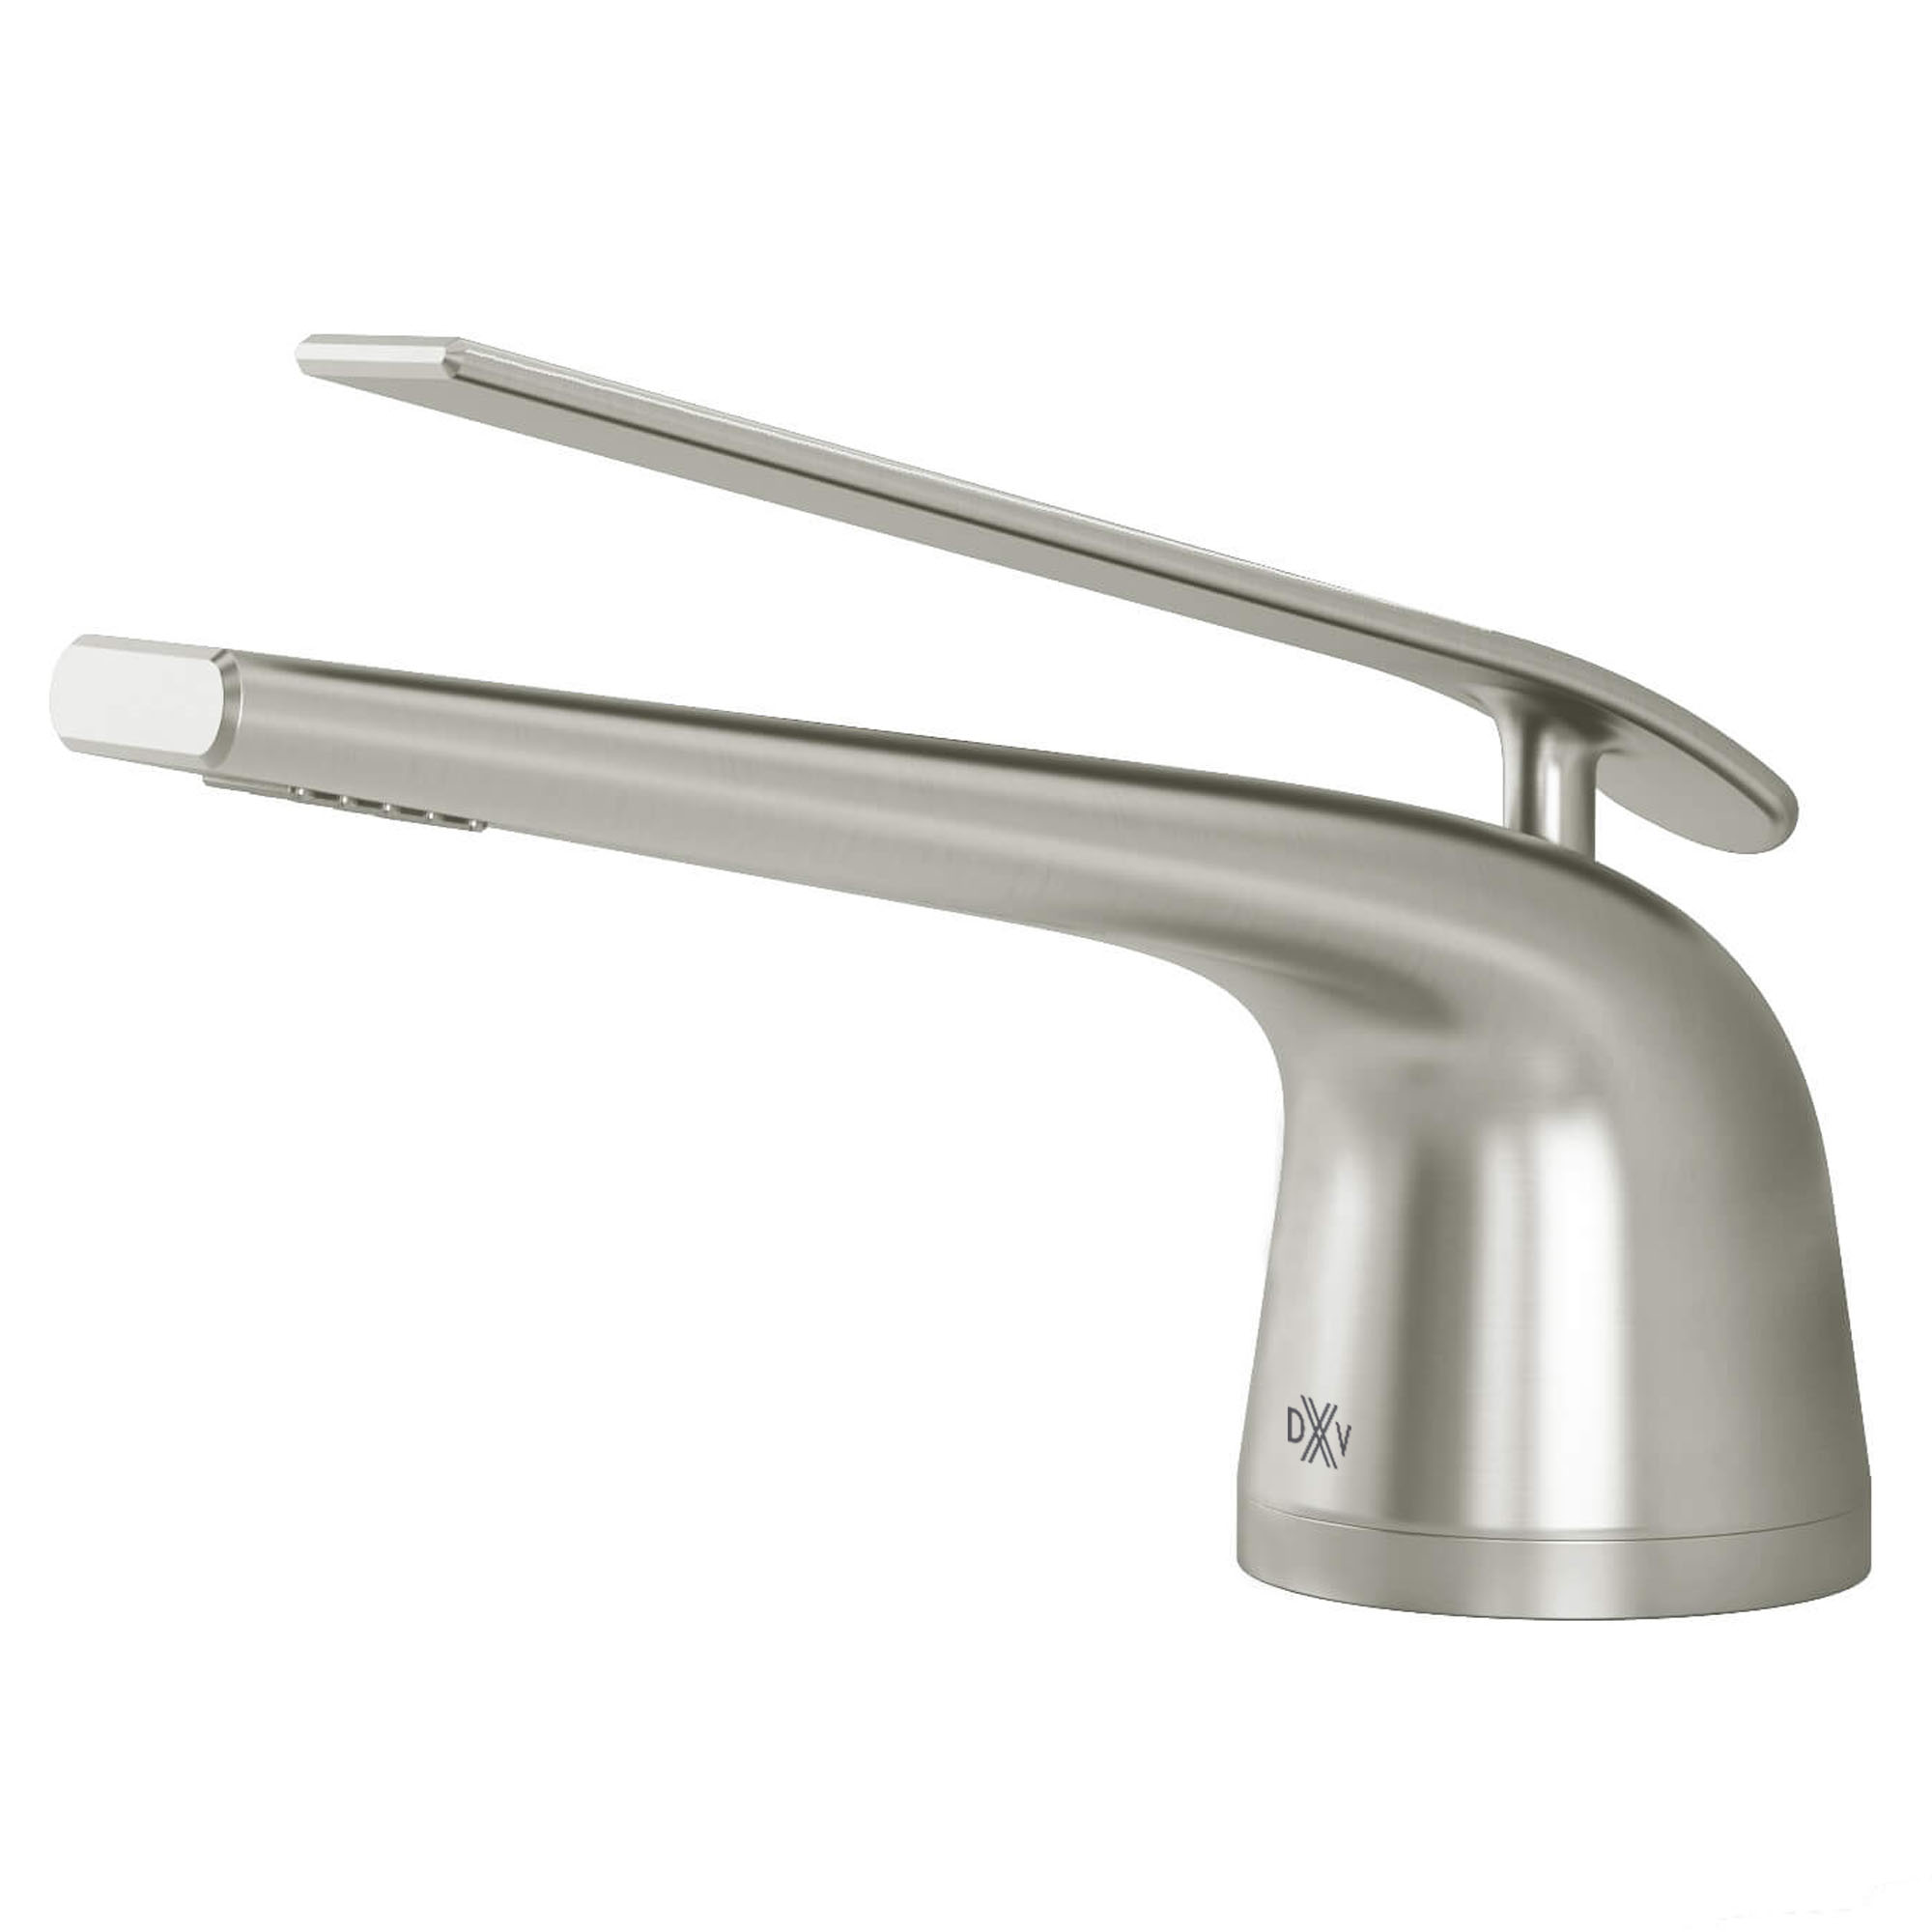 DXV MODULUS ½-INCH OR ¾-INCH THERMOSTATIC VALVE TRIM